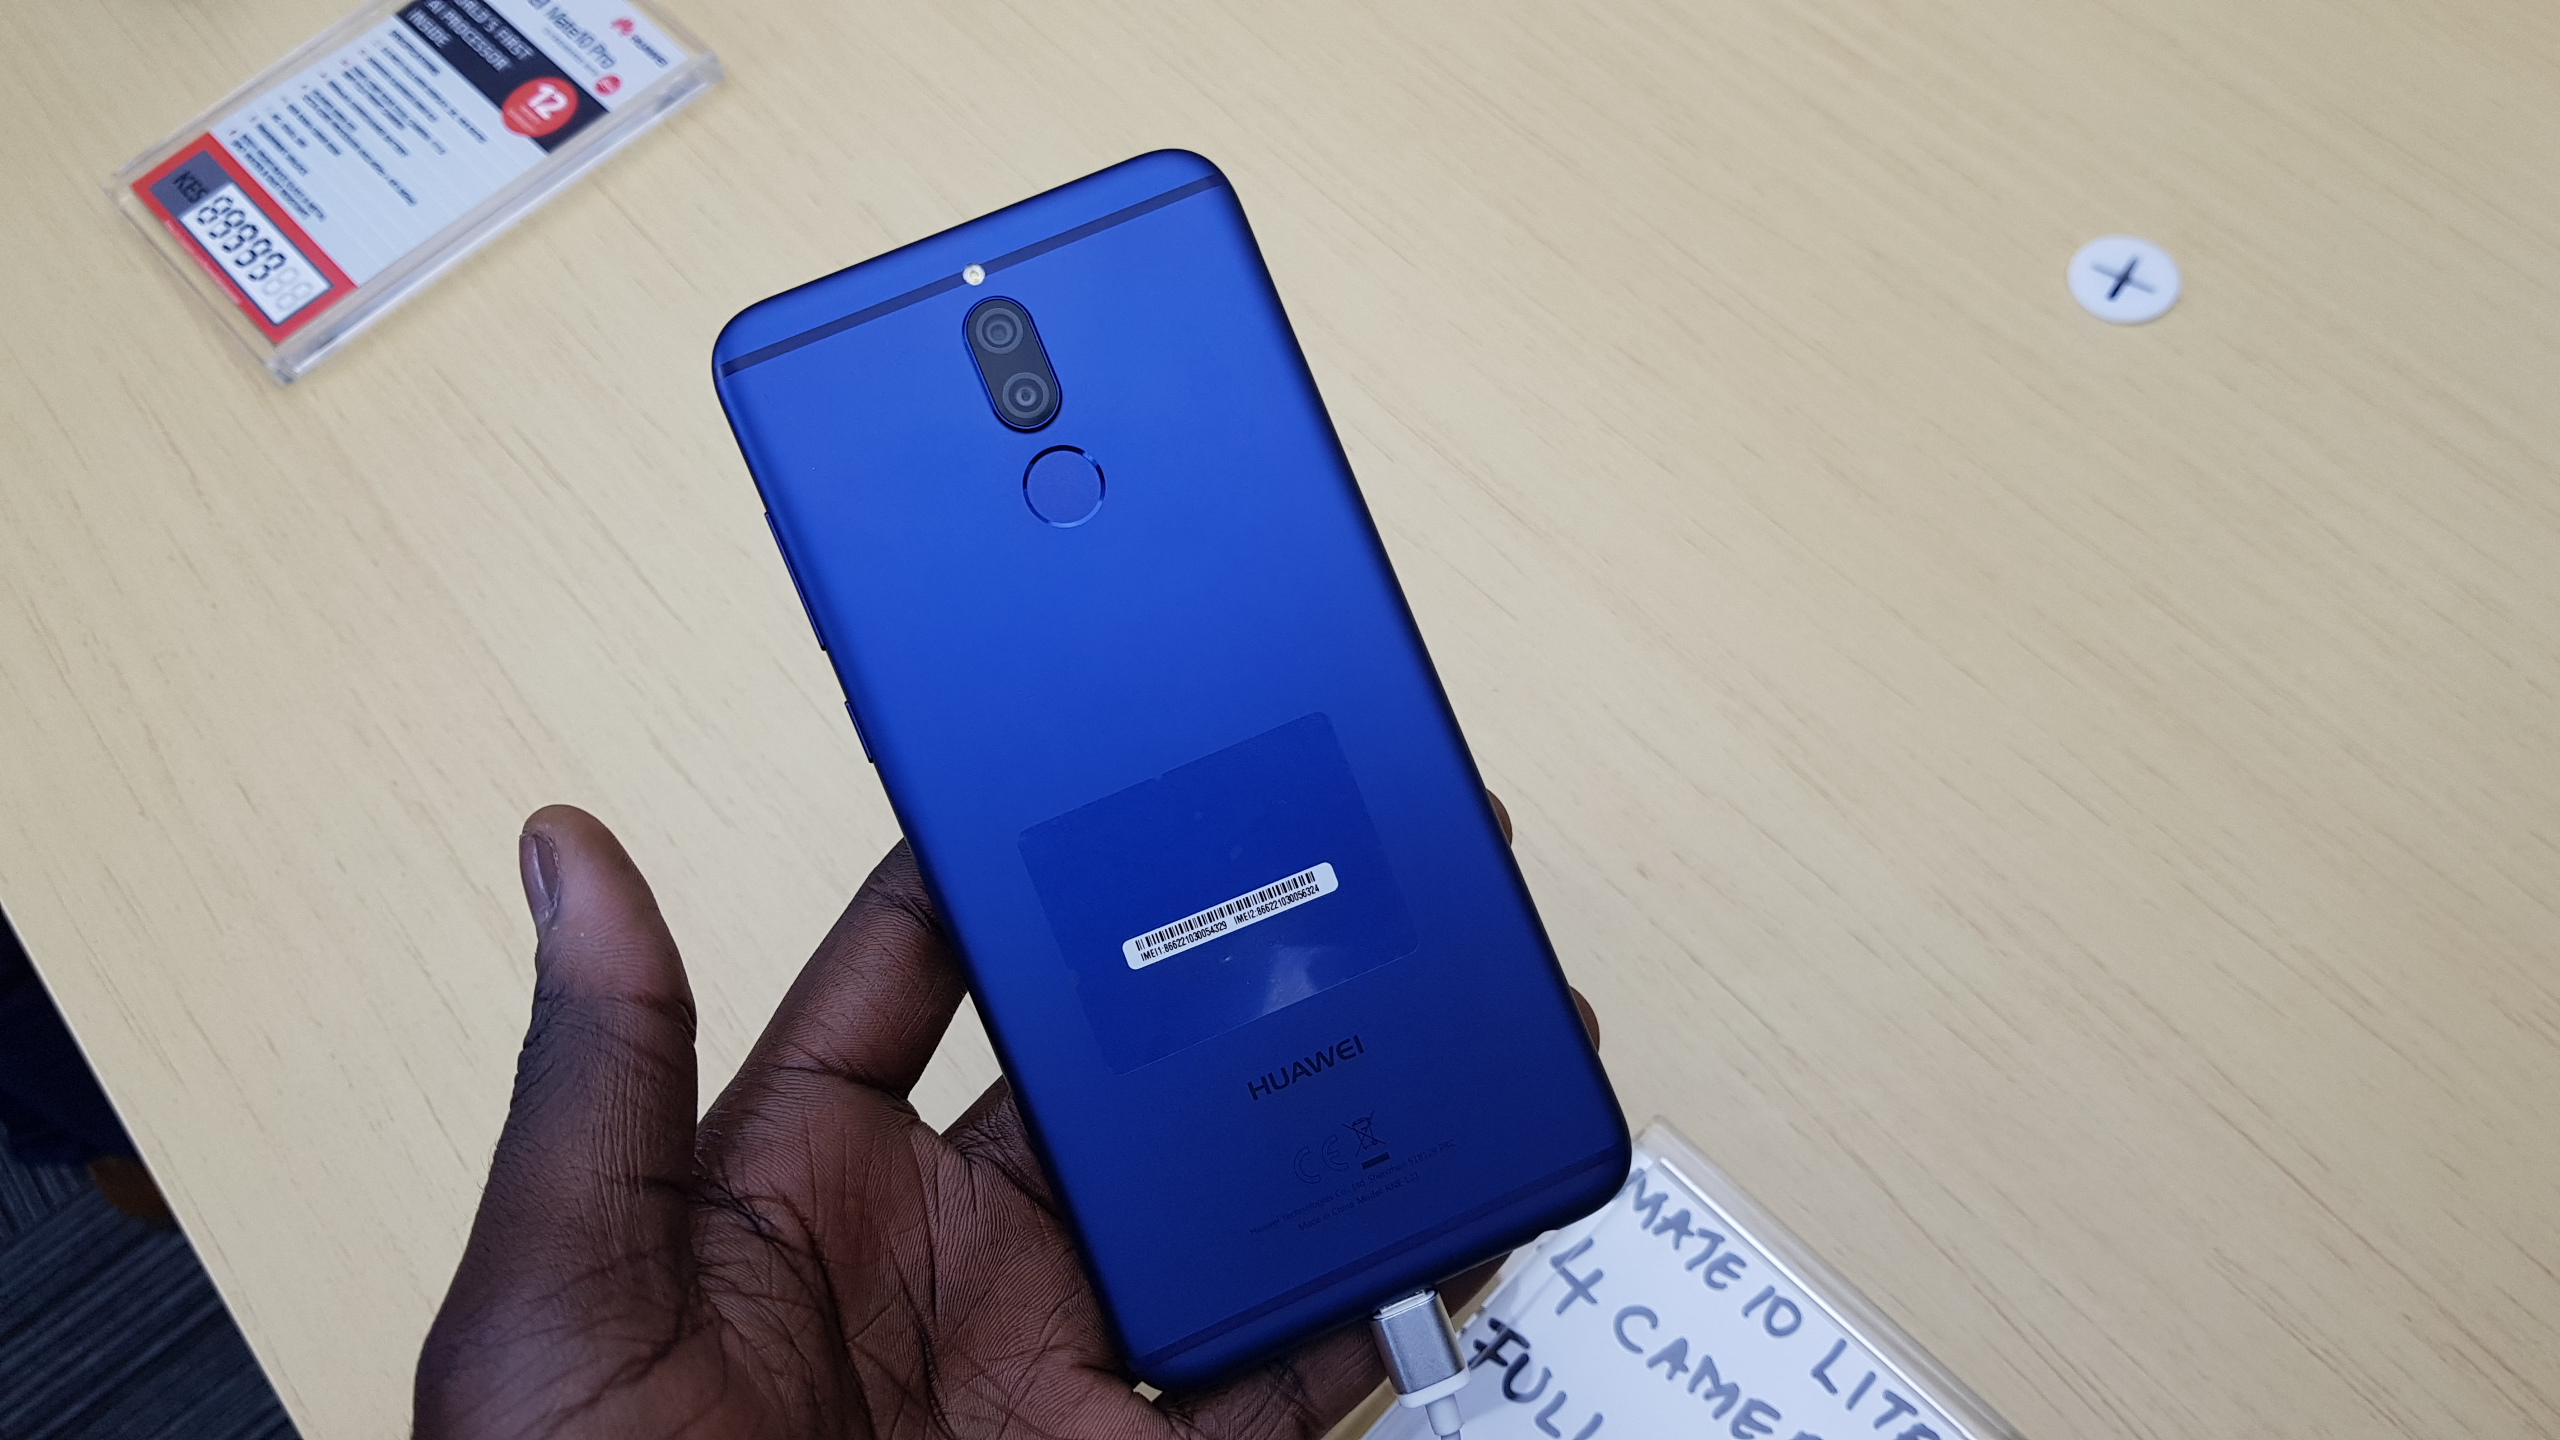 Huawei Mate 10 Lite Specifications and Price in Kenya